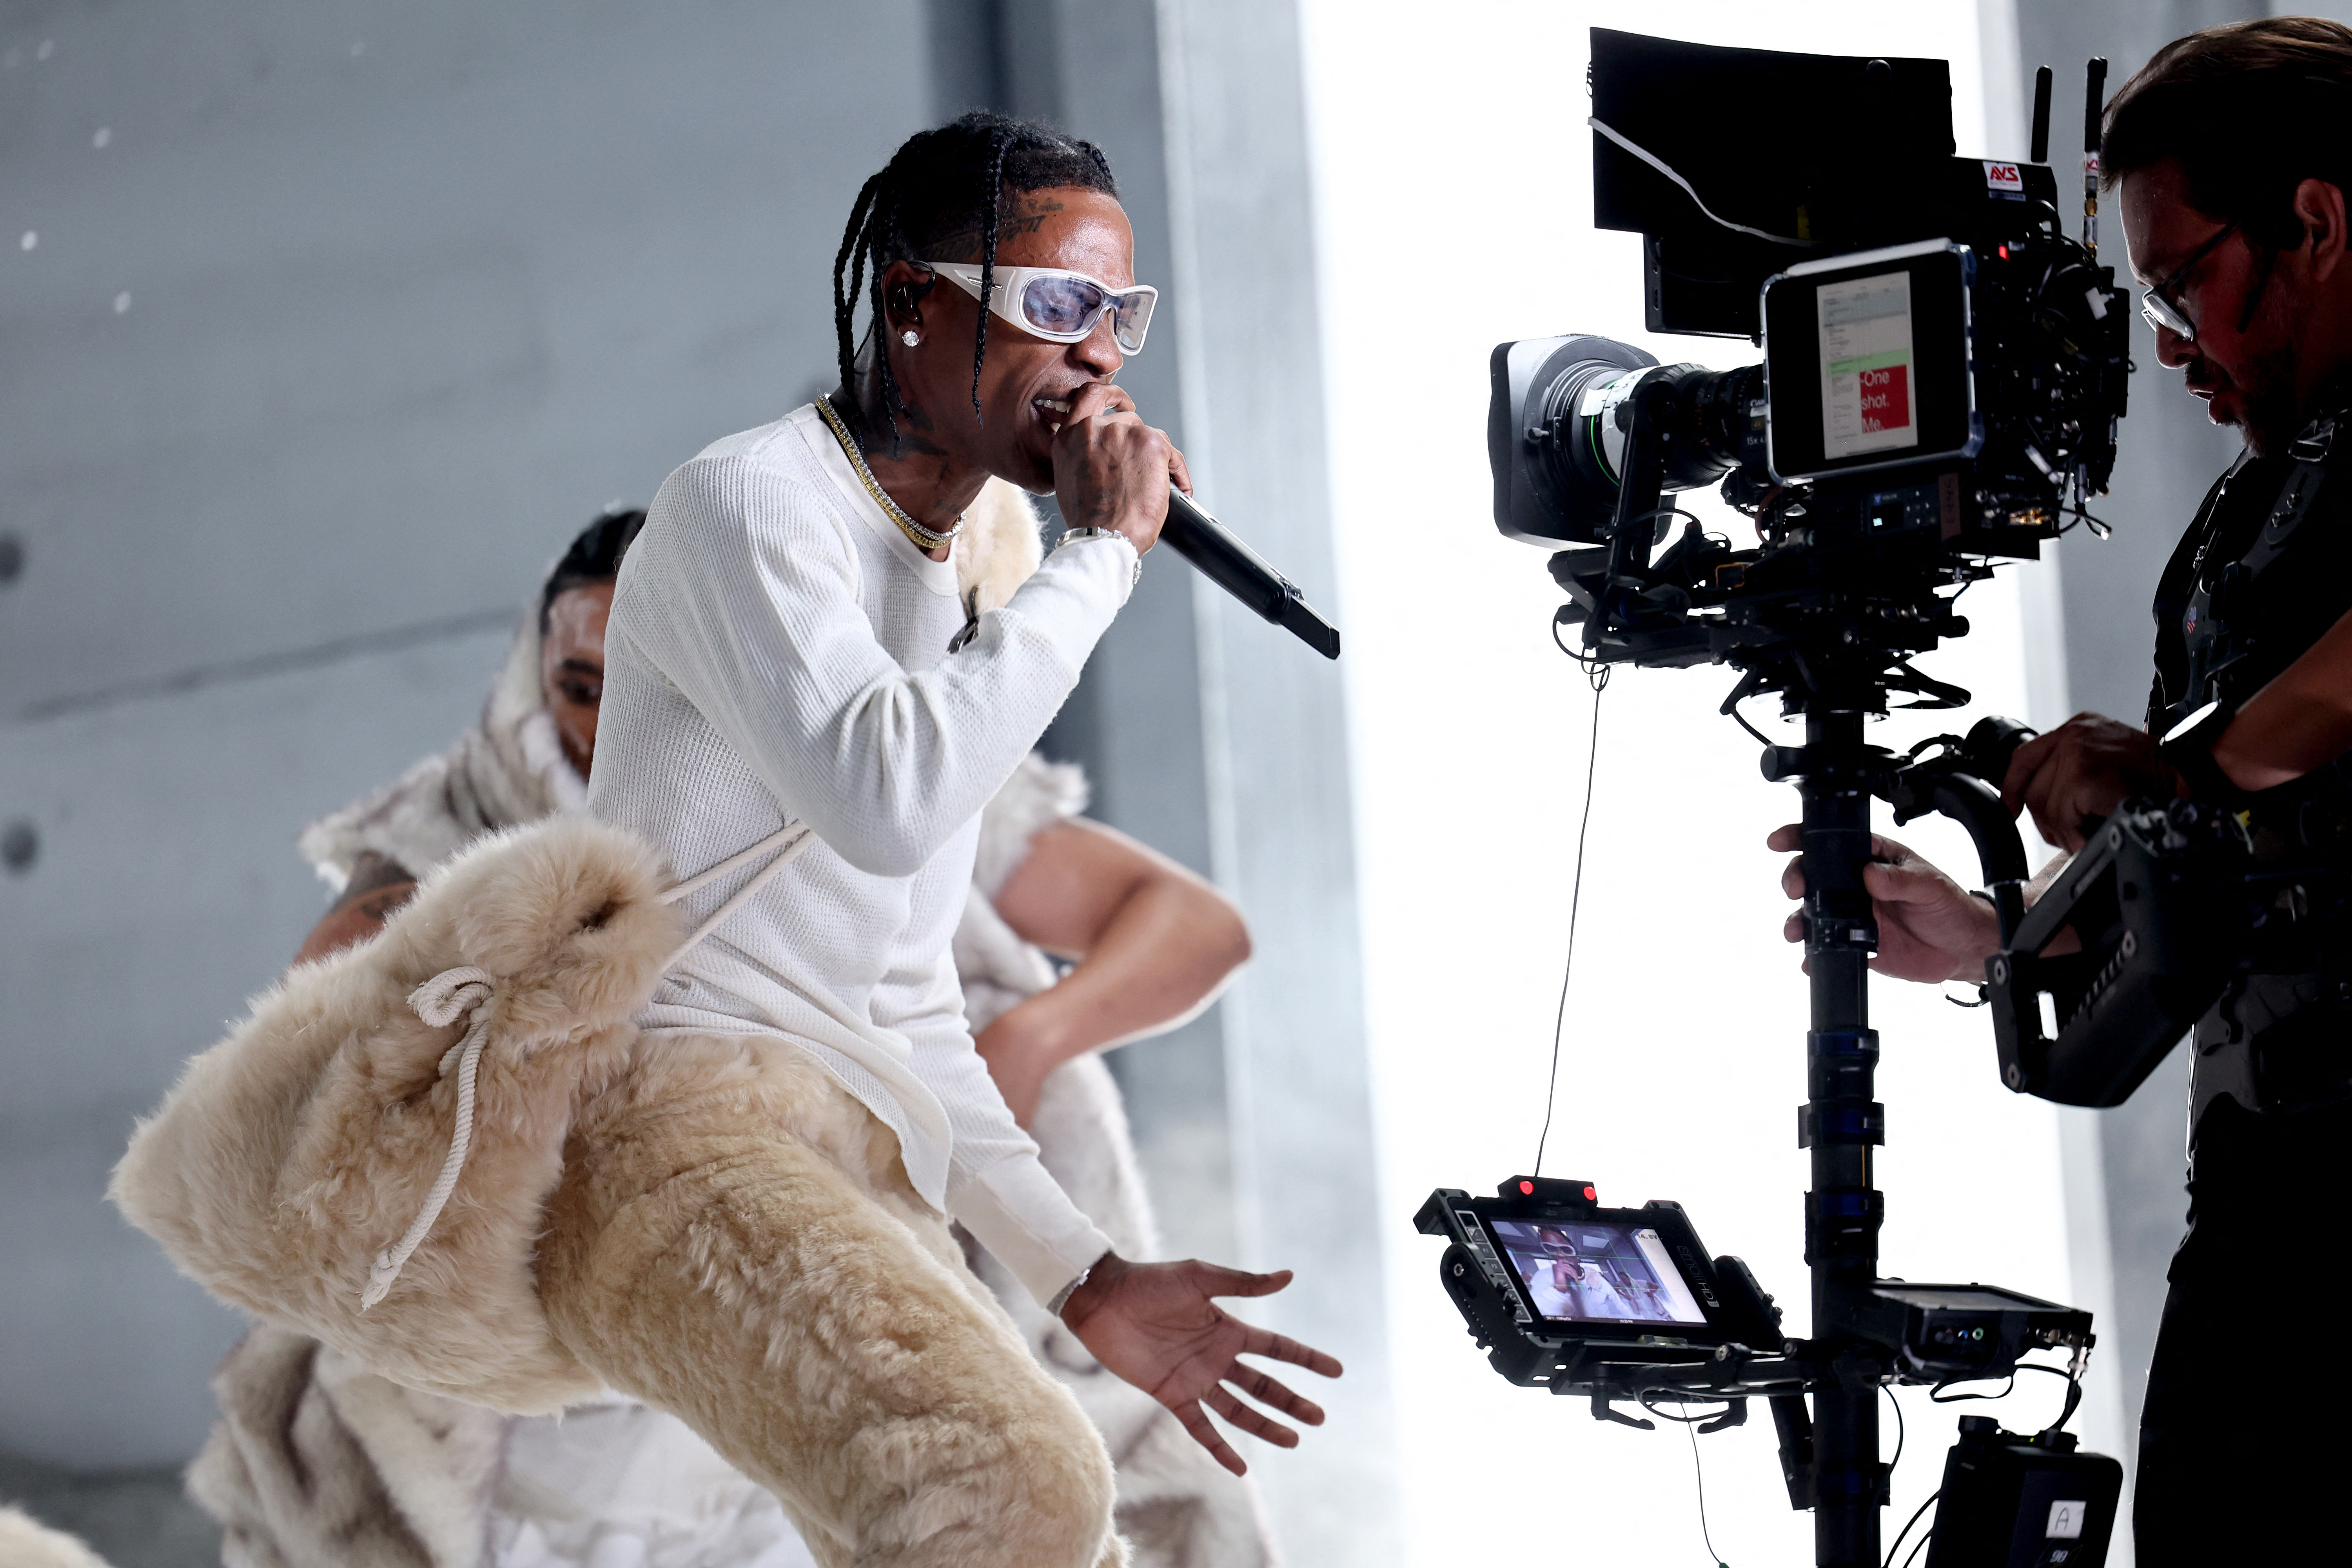 Travis Scott's foundation awards US$1M in scholarships to help 100 HBCU students